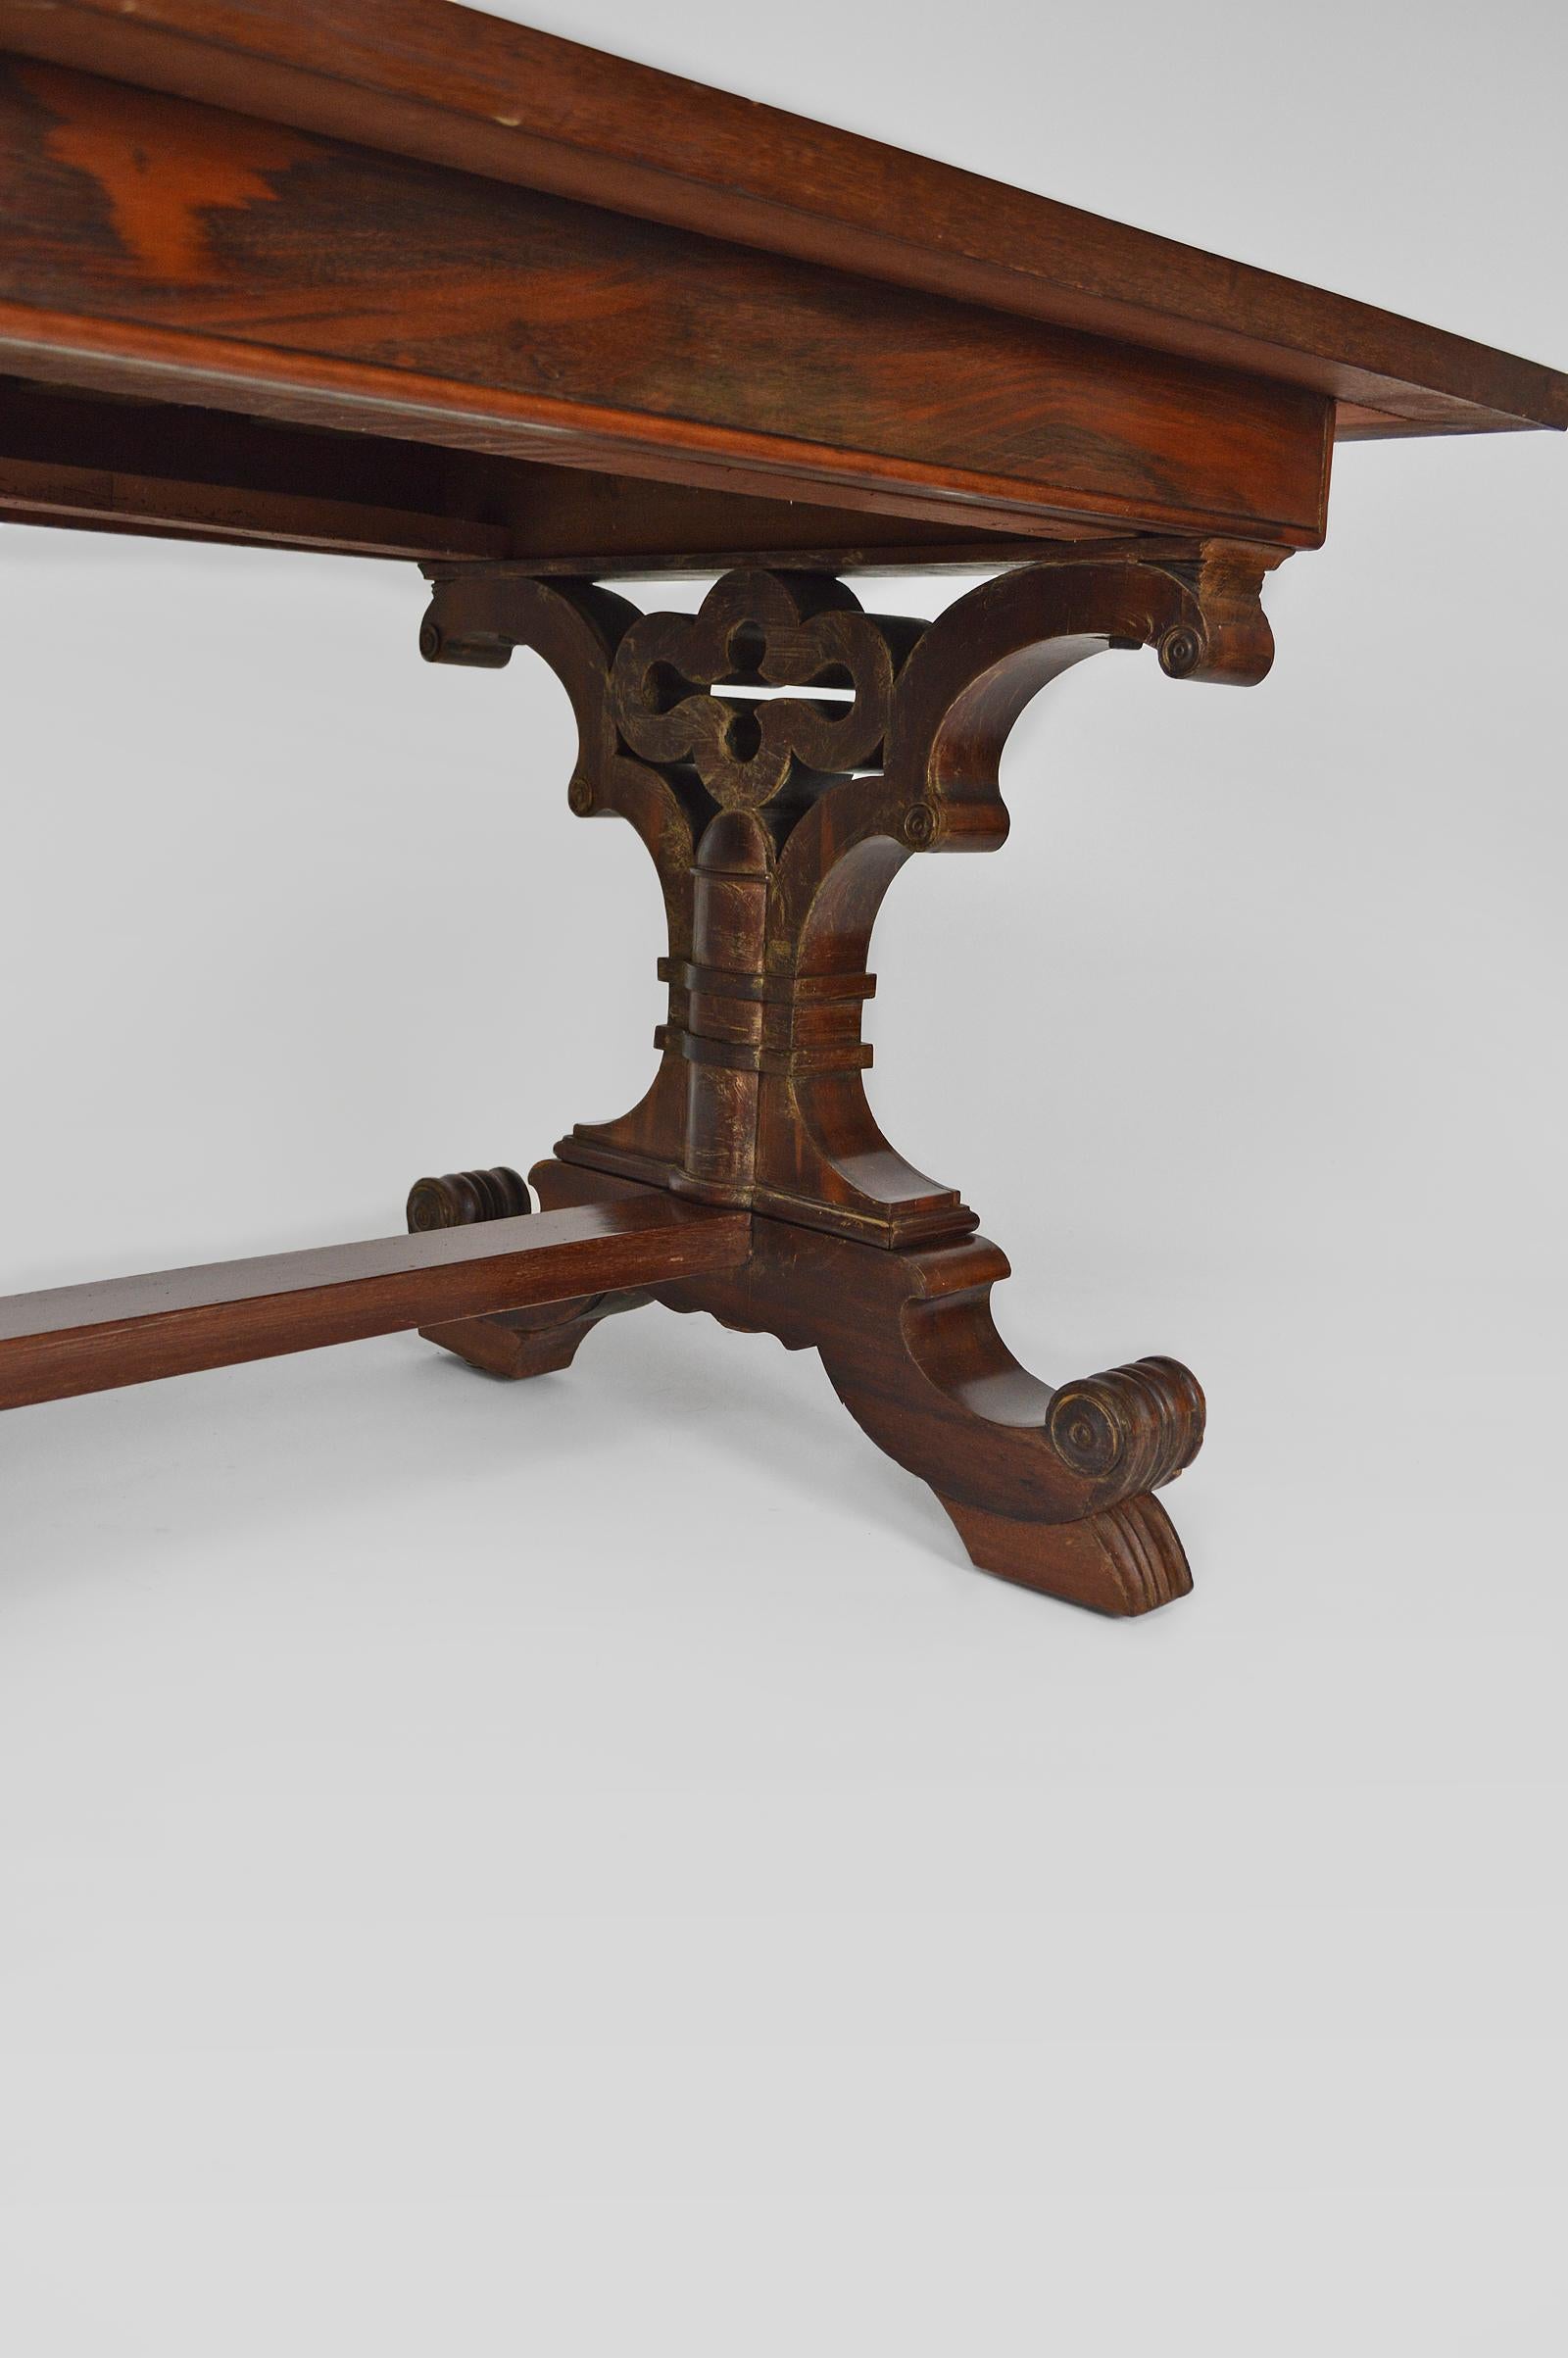 Gothic Revival Dining Table in Mahogany, Victorian Era, circa 1840 For Sale 9